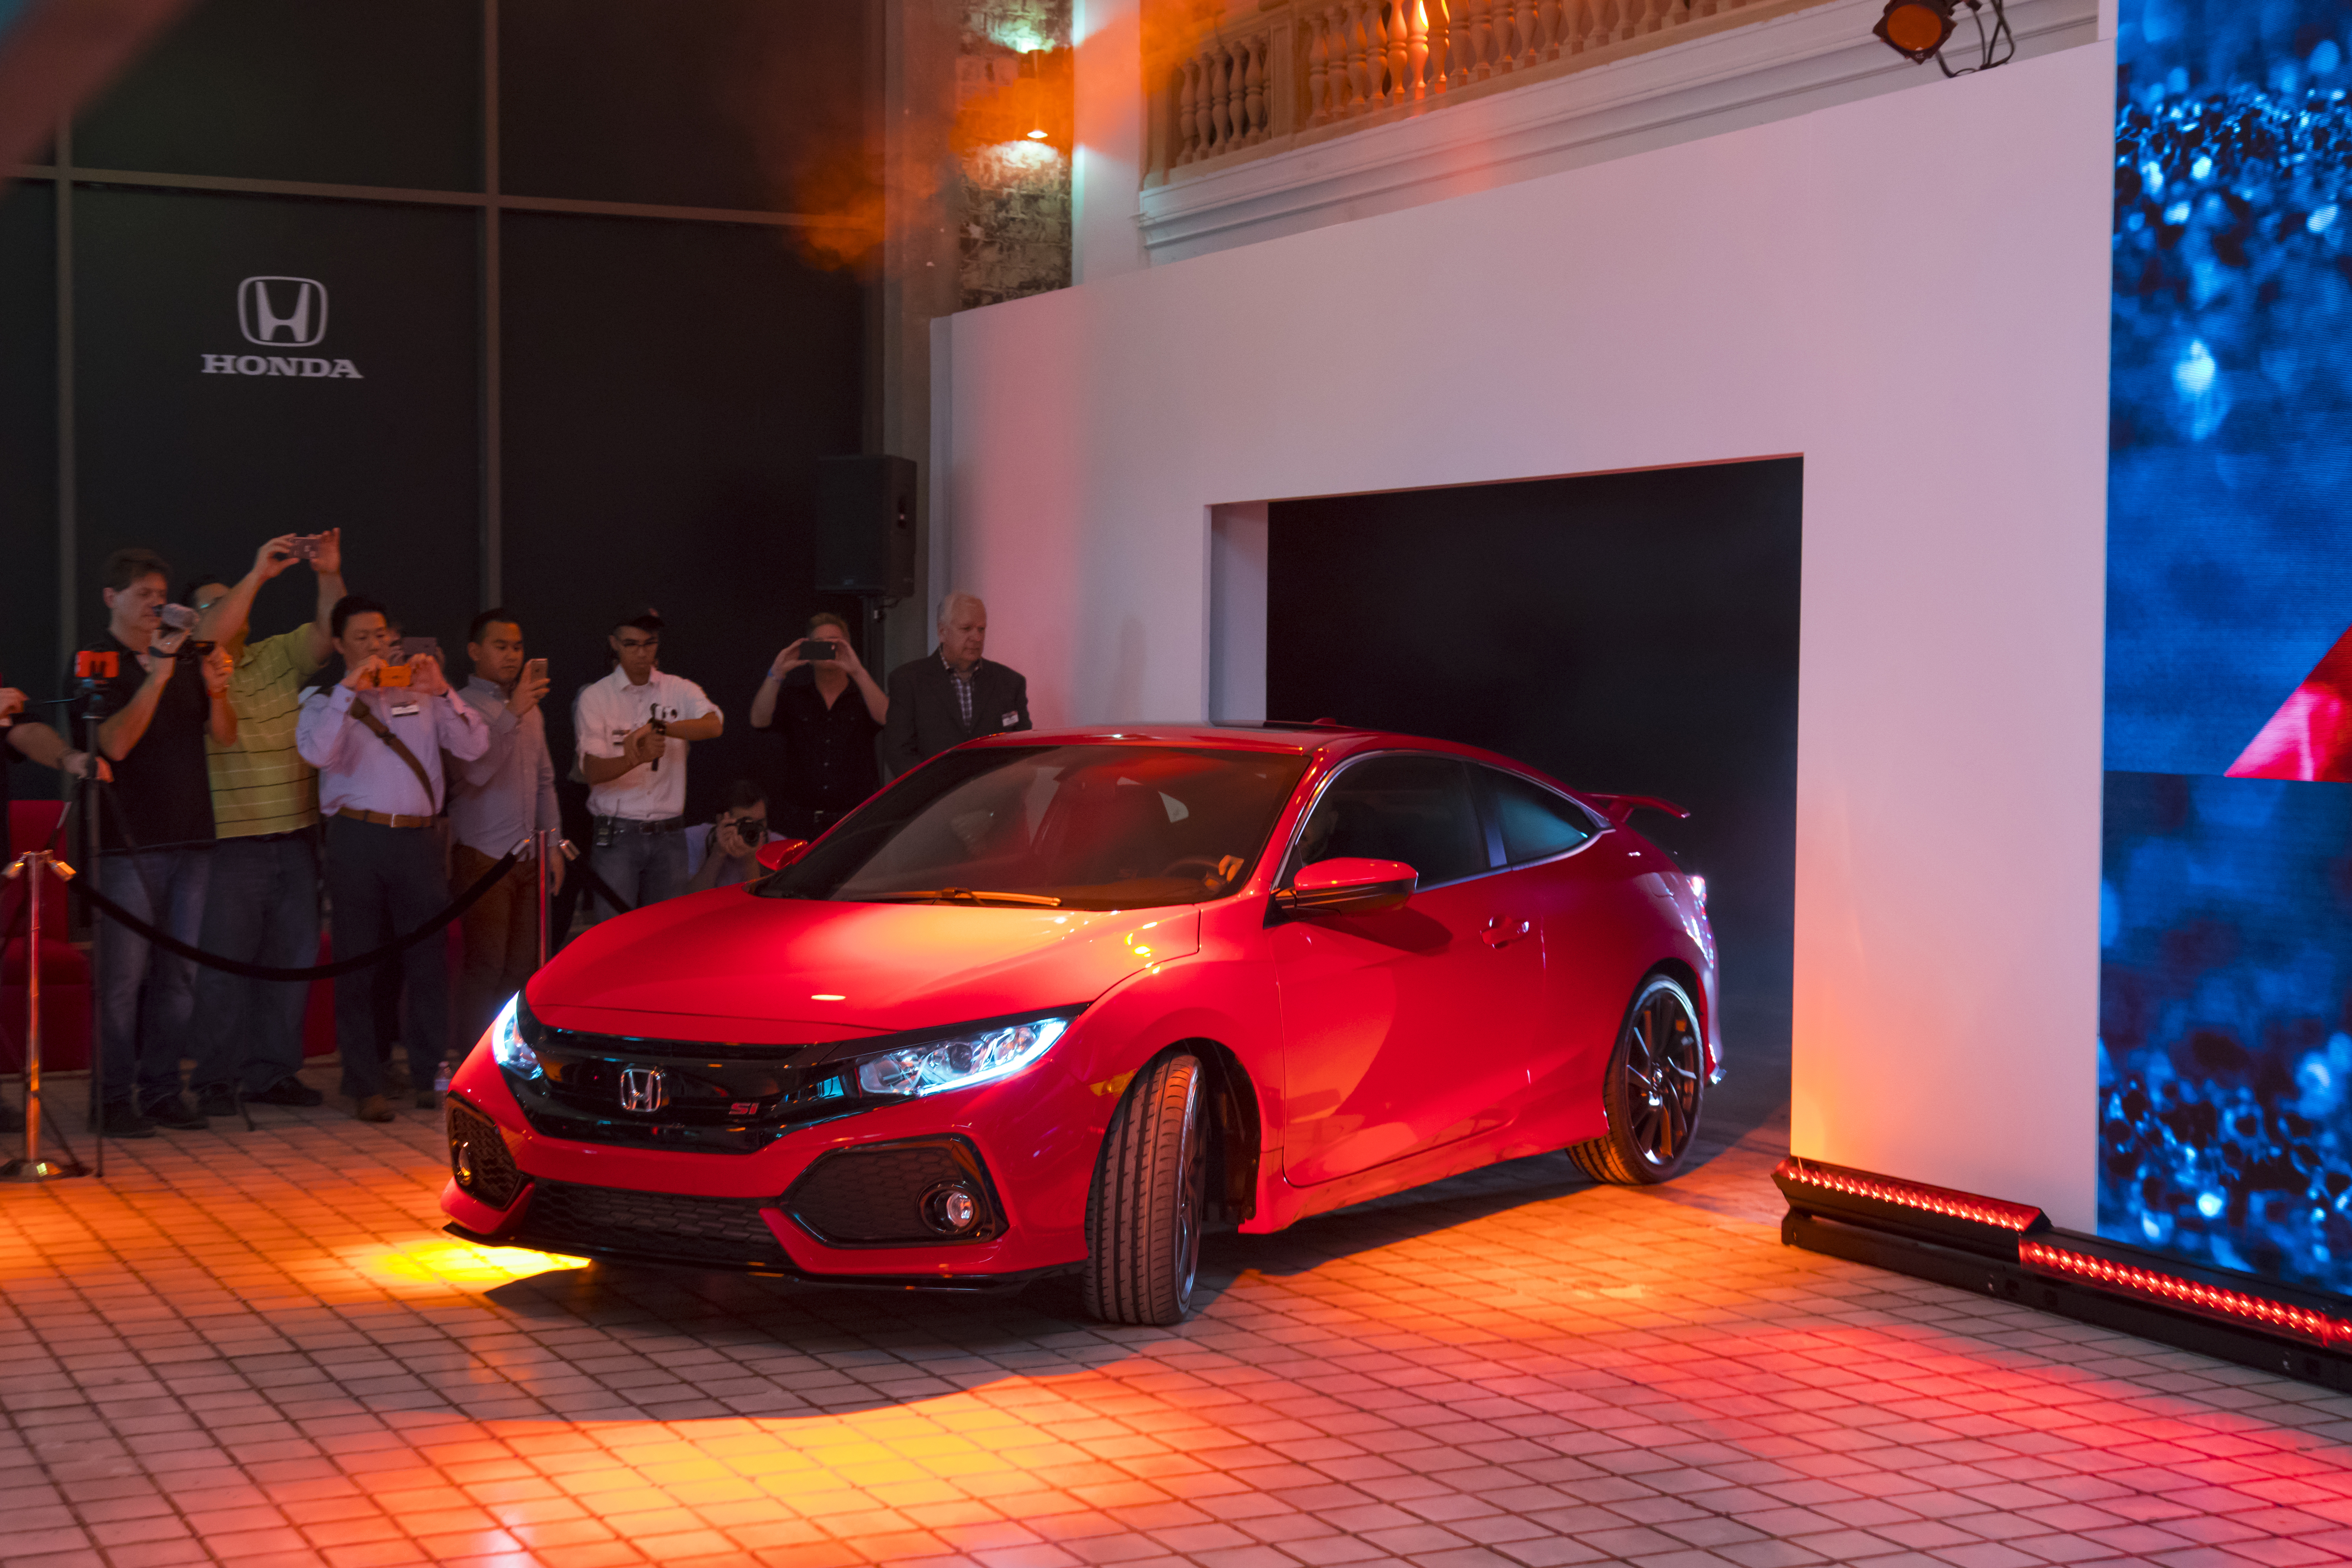 The Civic Si Prototype is revealed in Los Angeles on November 15, 2016.